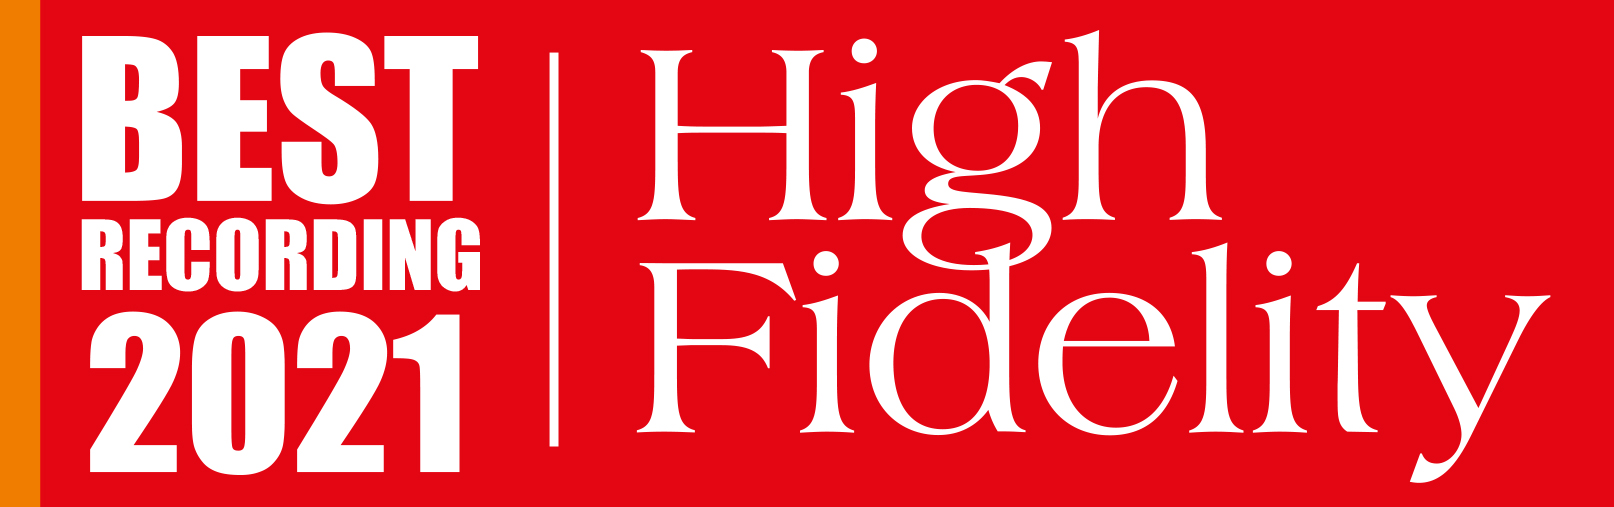 The High Fidelity Best Sound Awards for 2021